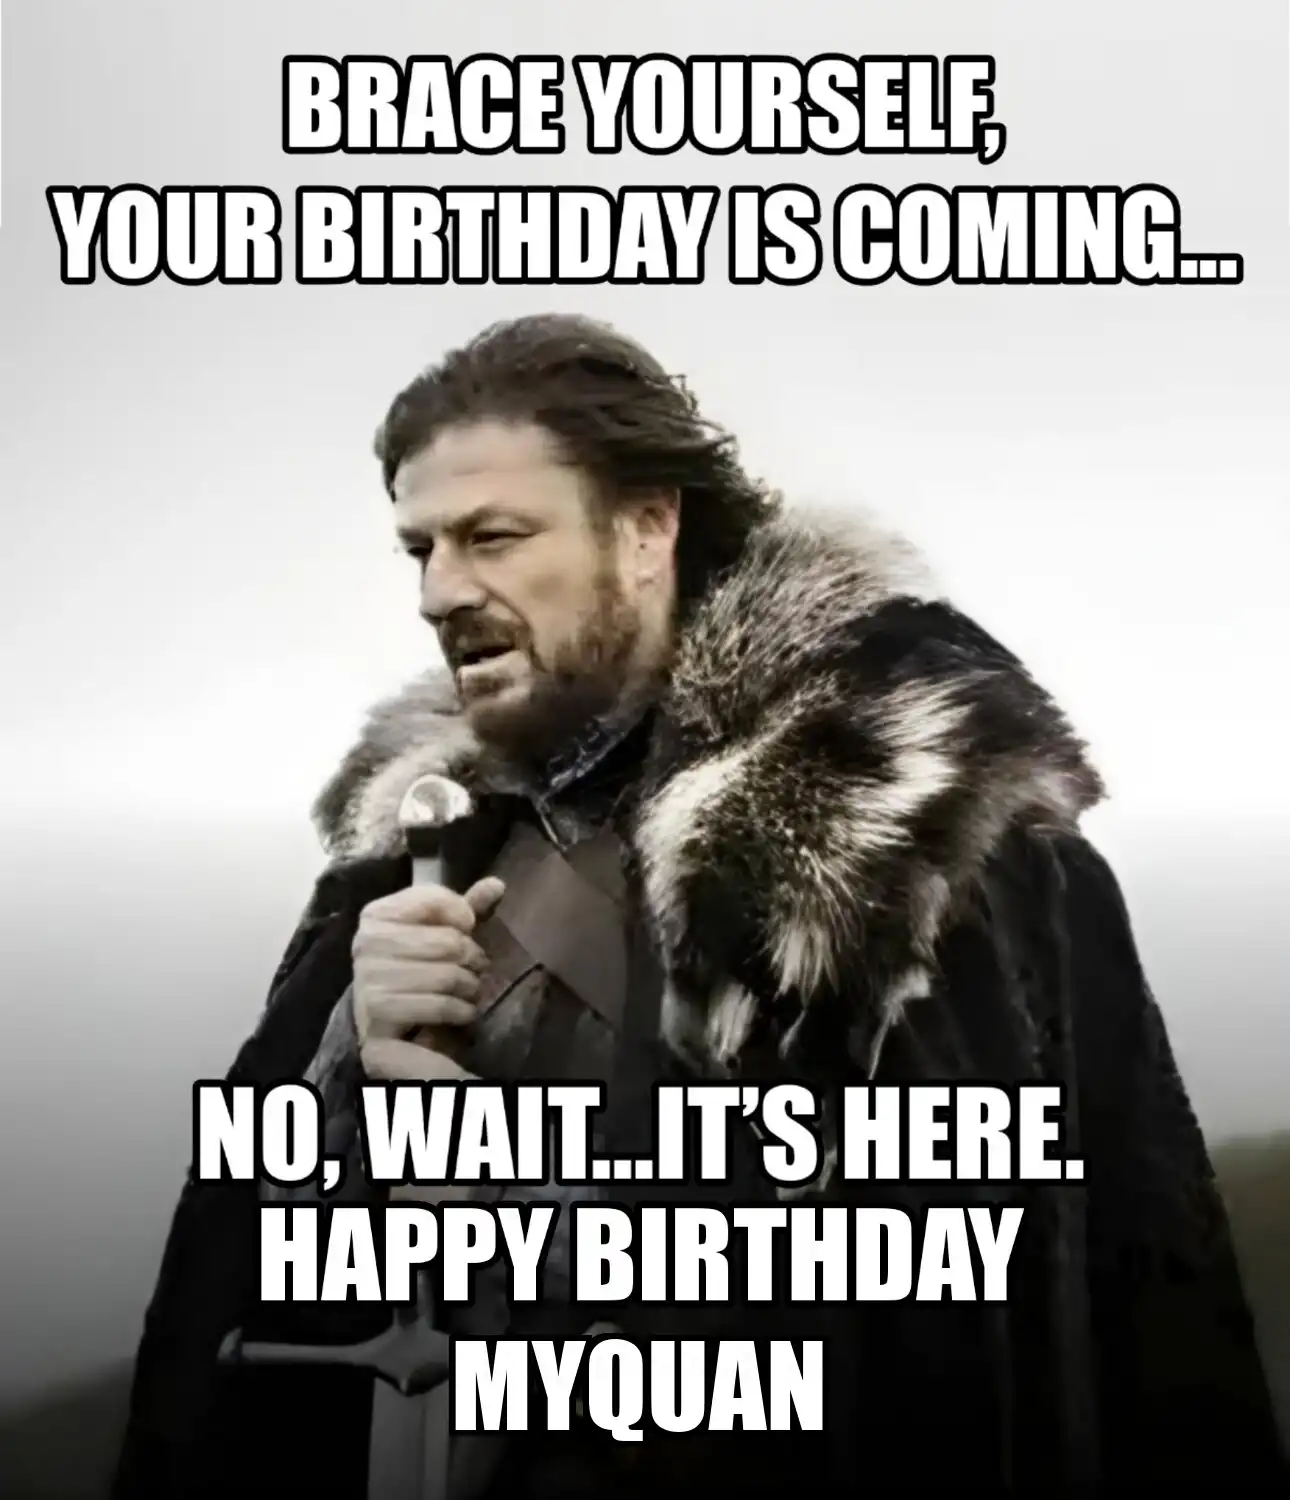 Happy Birthday Myquan Brace Yourself Your Birthday Is Coming Meme